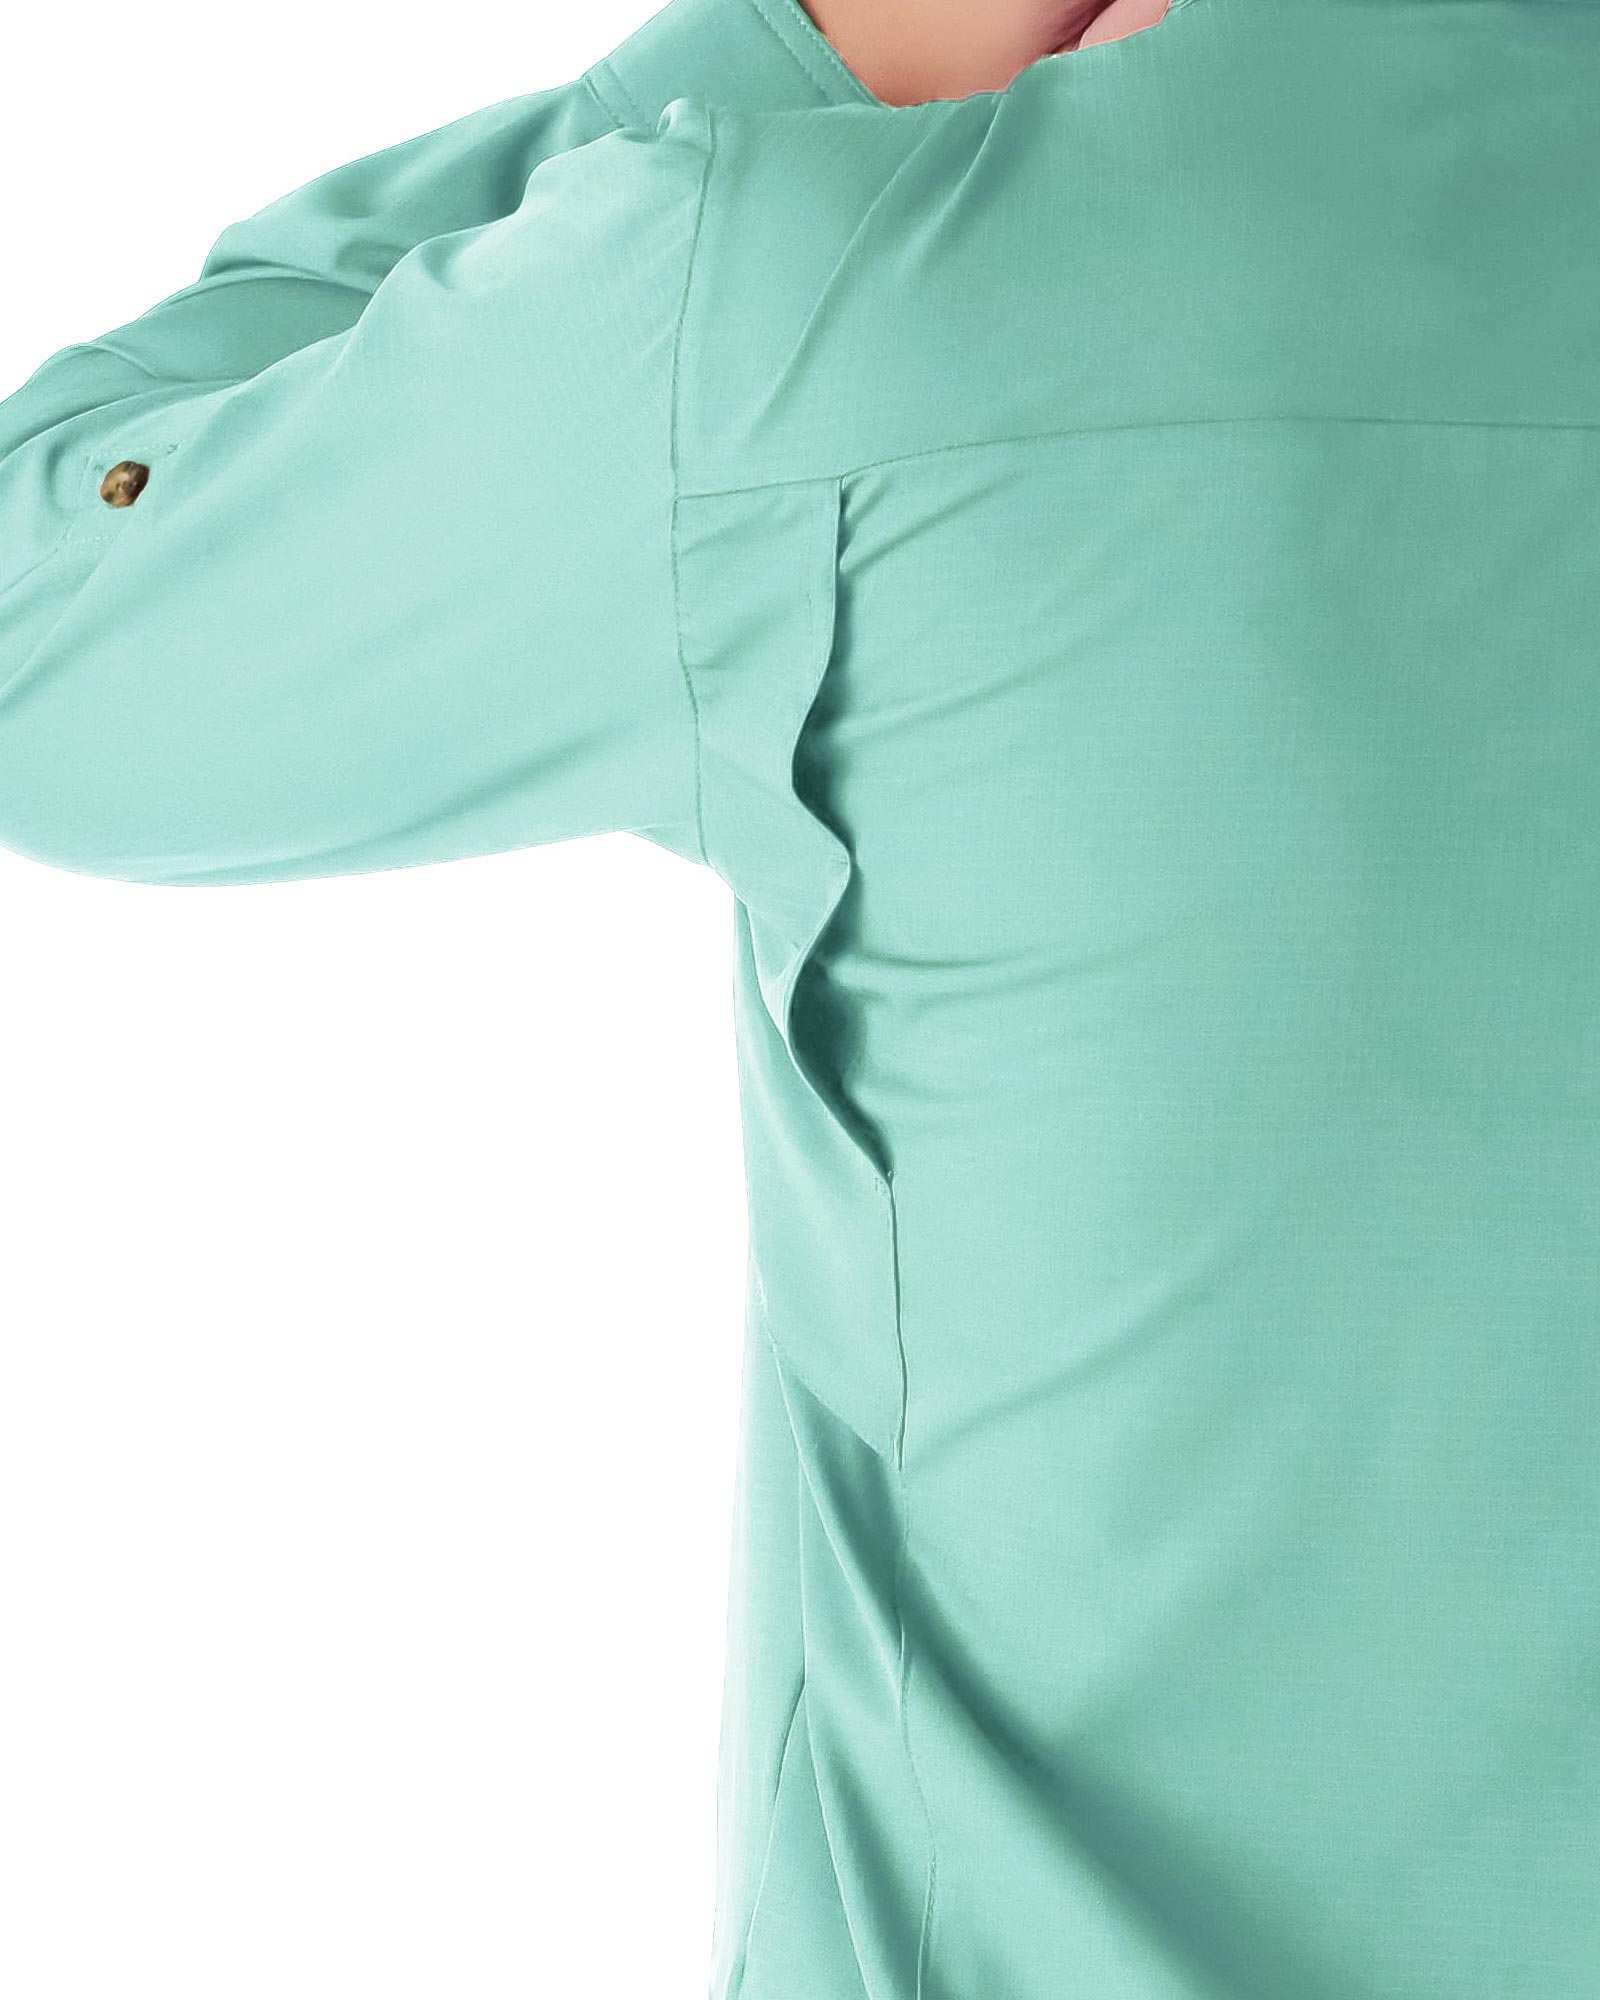 Men's UPF 50+ Breathable Mesh Lined Vents Adjustable Sleeve Shirt – 33,000ft